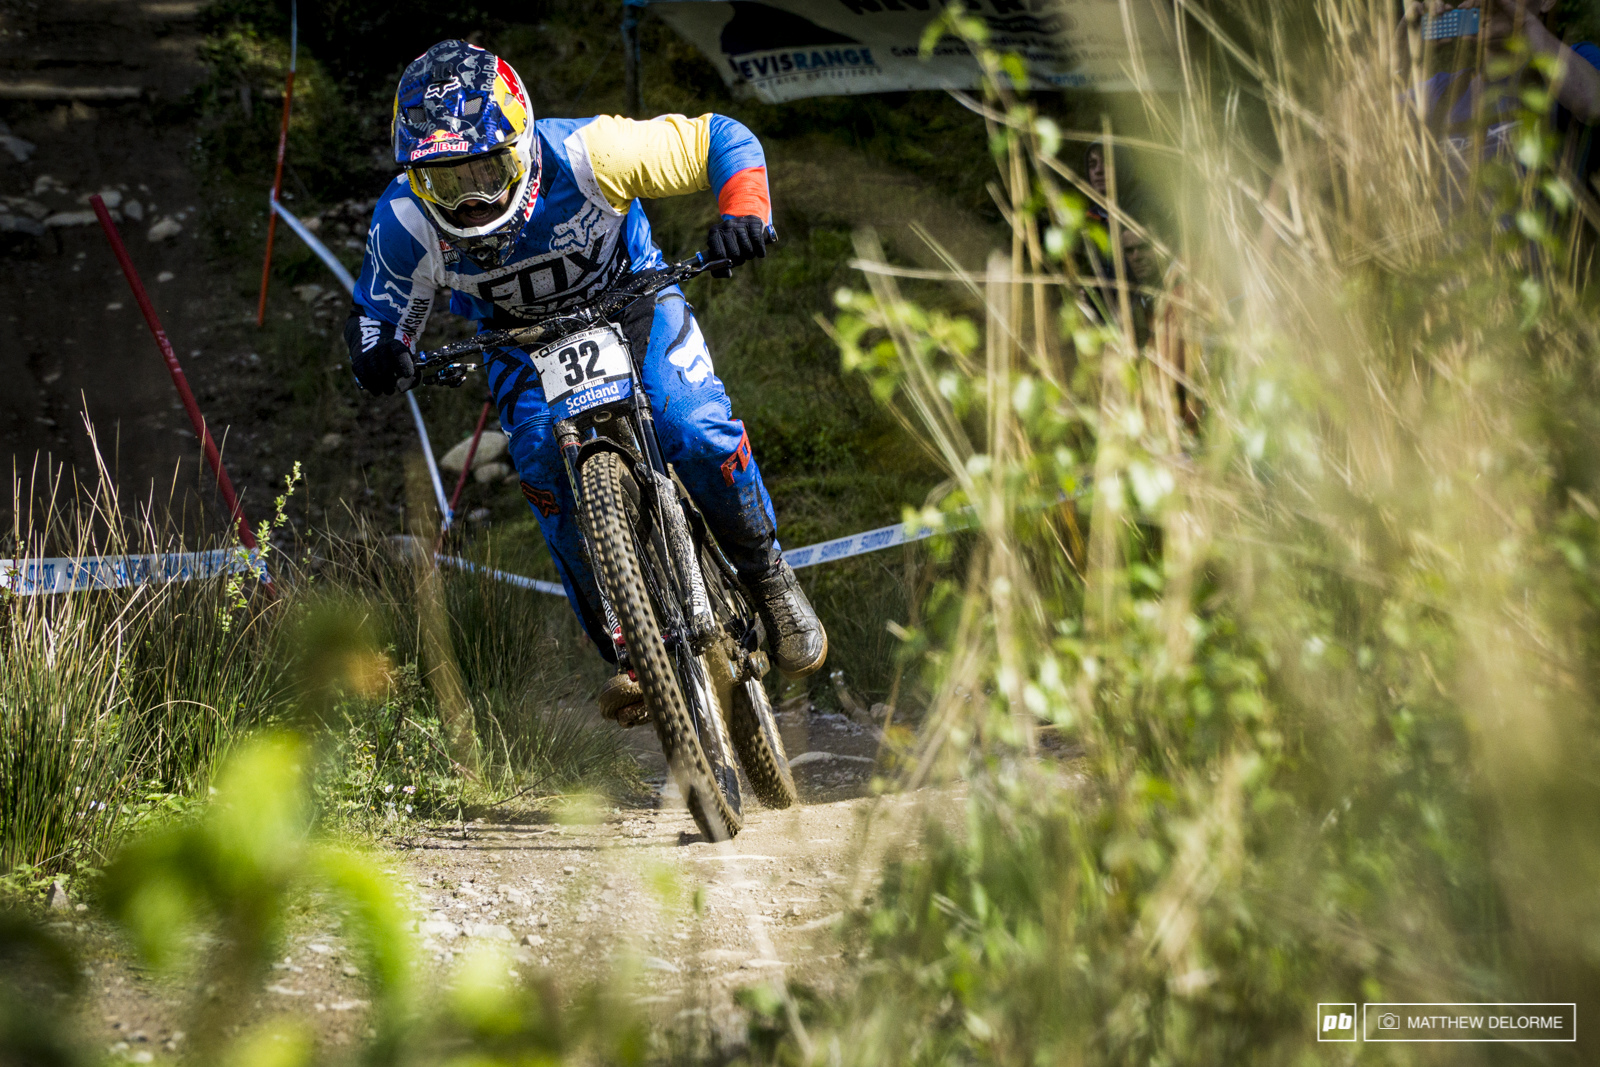 Marcelo Gutierrez was looking fast in practice Friday. He kept up the pace on Sunday to finish third. Marcelo is also the first Colombian on a World Cup DH podium.